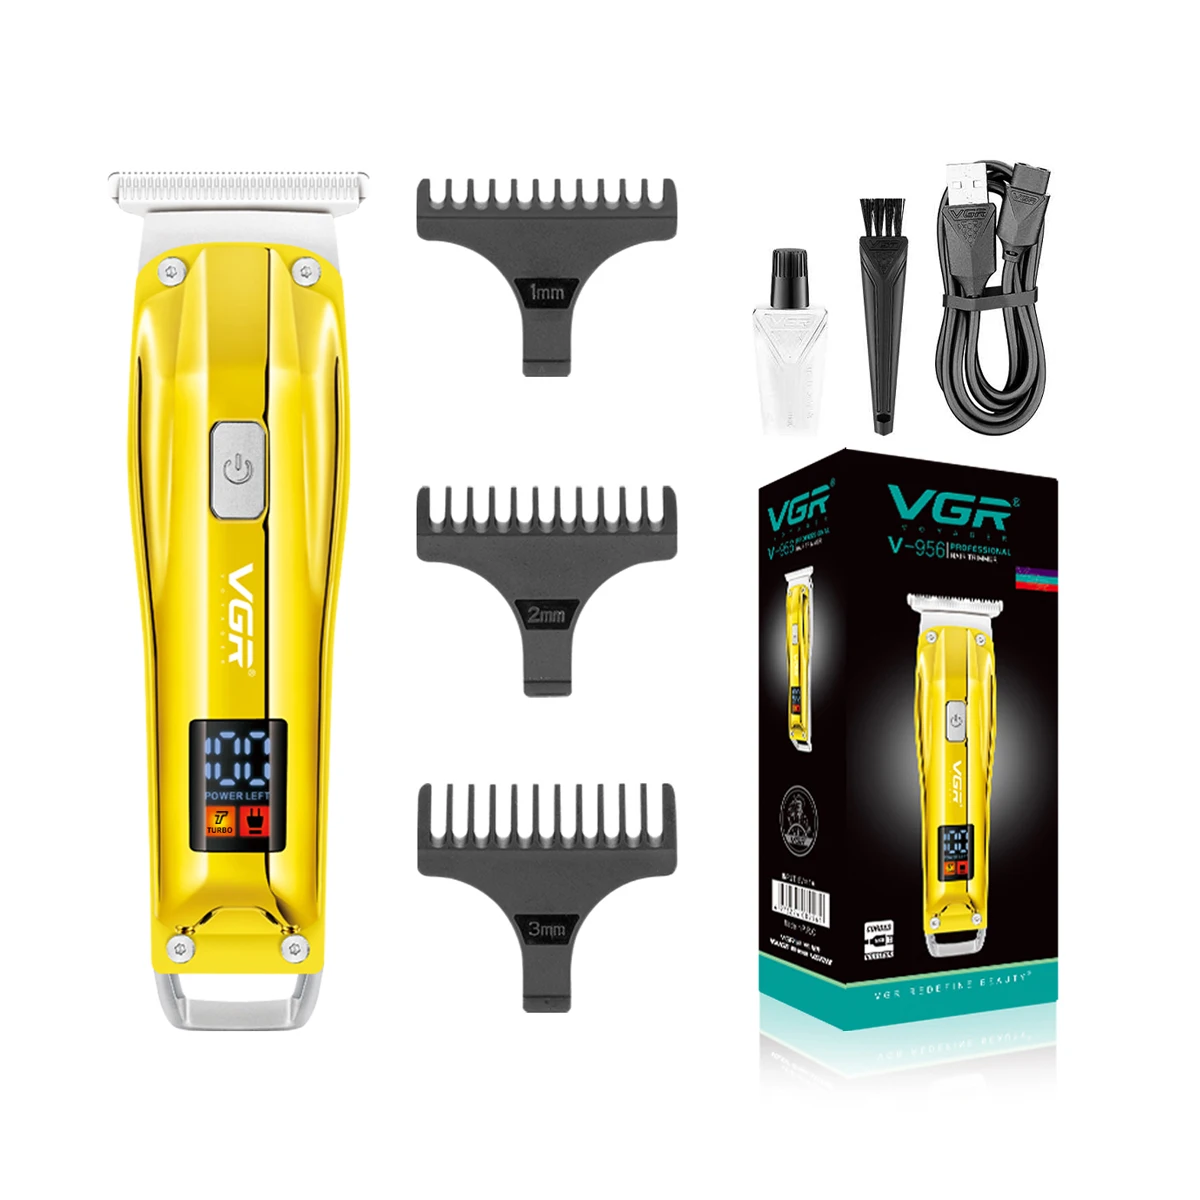 VGR V-956 New Design Hair Cutting Machine Rechargeable Cordless Hair Clippers Professional Electric Hair Trimmer for Men